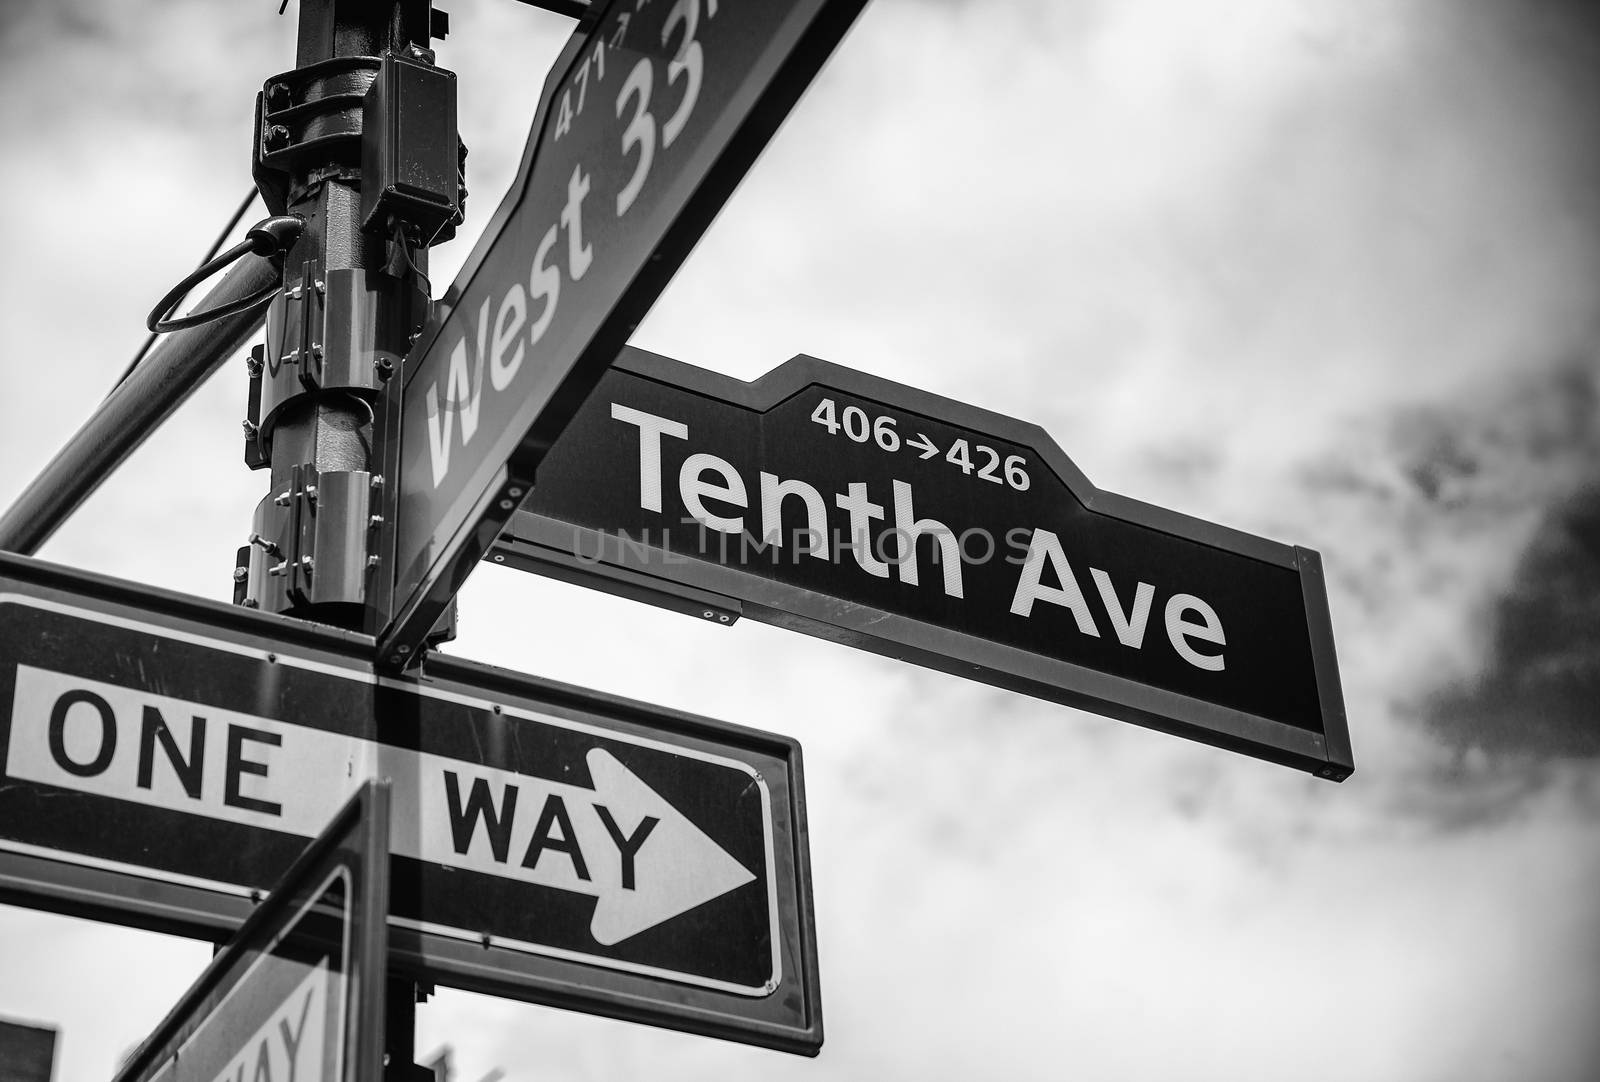 Street sign at the corner of 10th ave and 33rd st, Manhattan by jovannig